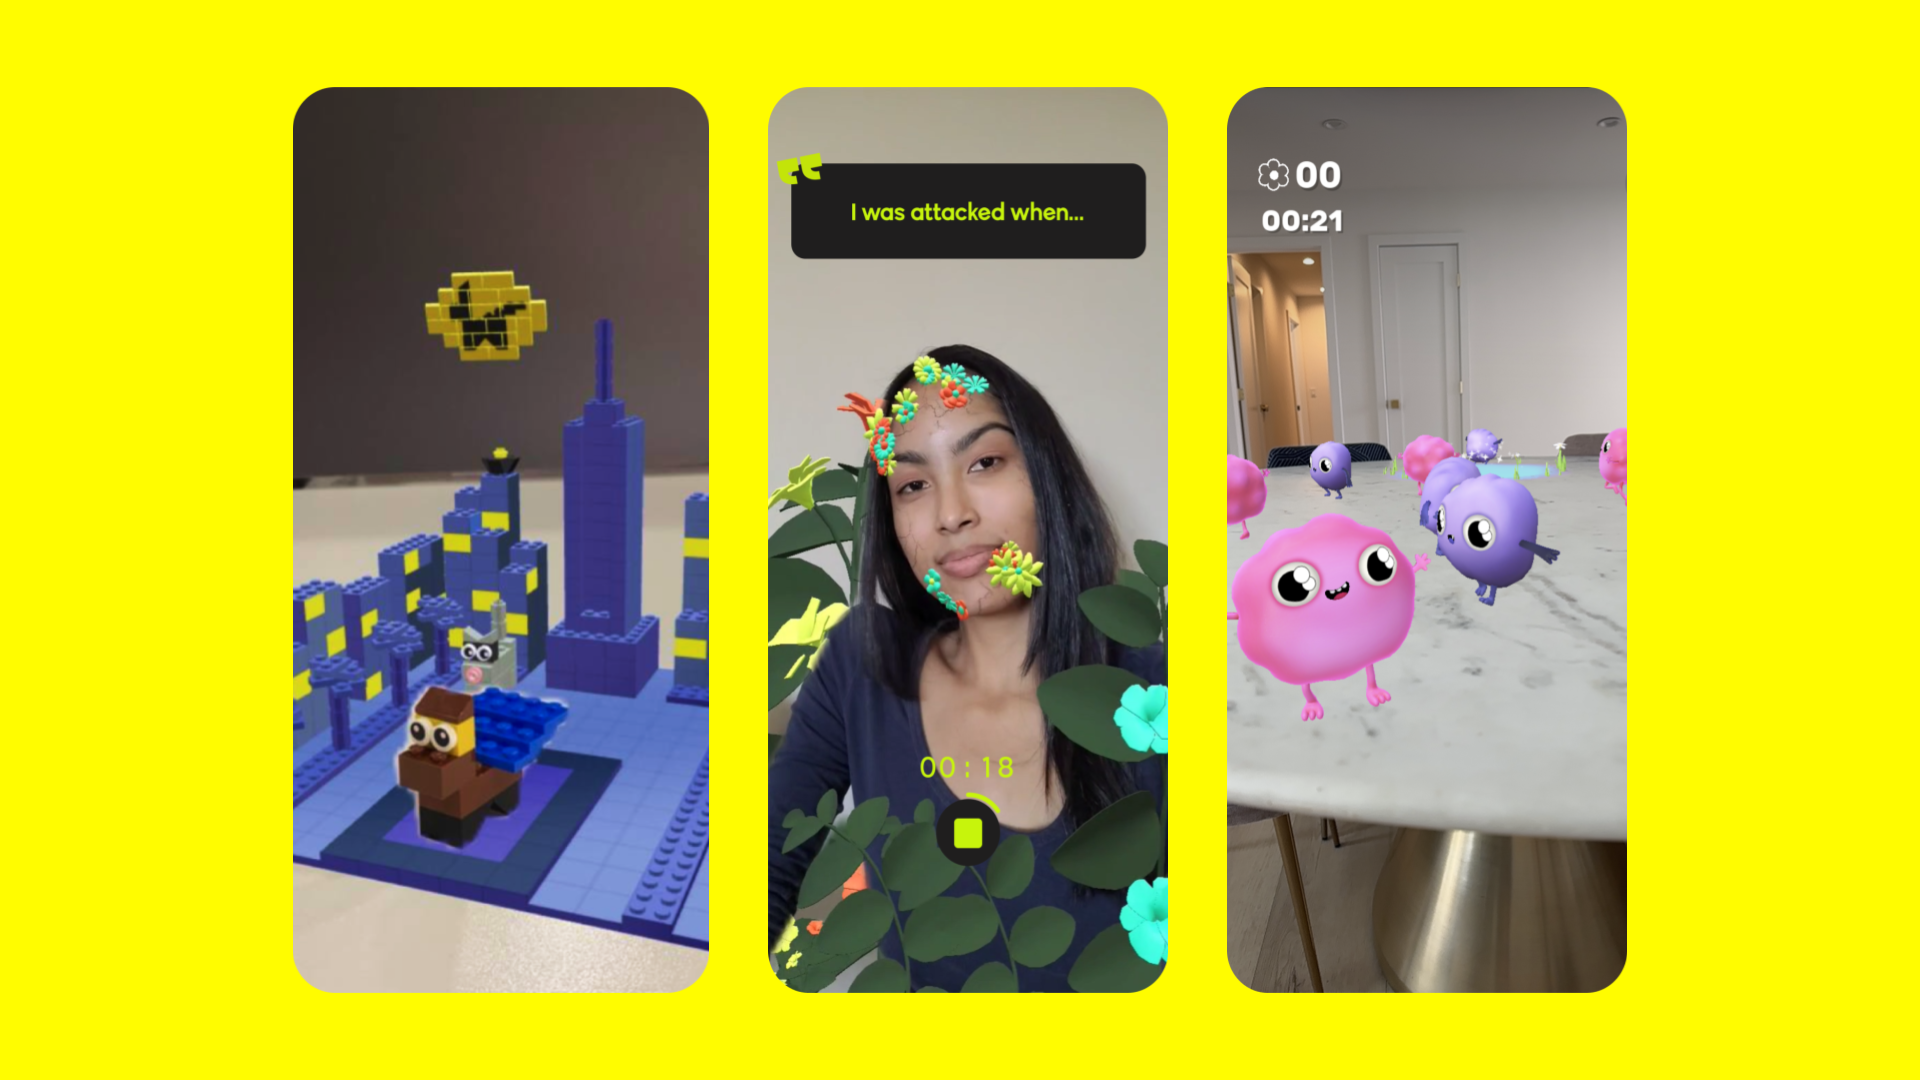 Snapchat's Viral 'Disgust' Lens Becomes One of the Most Popular